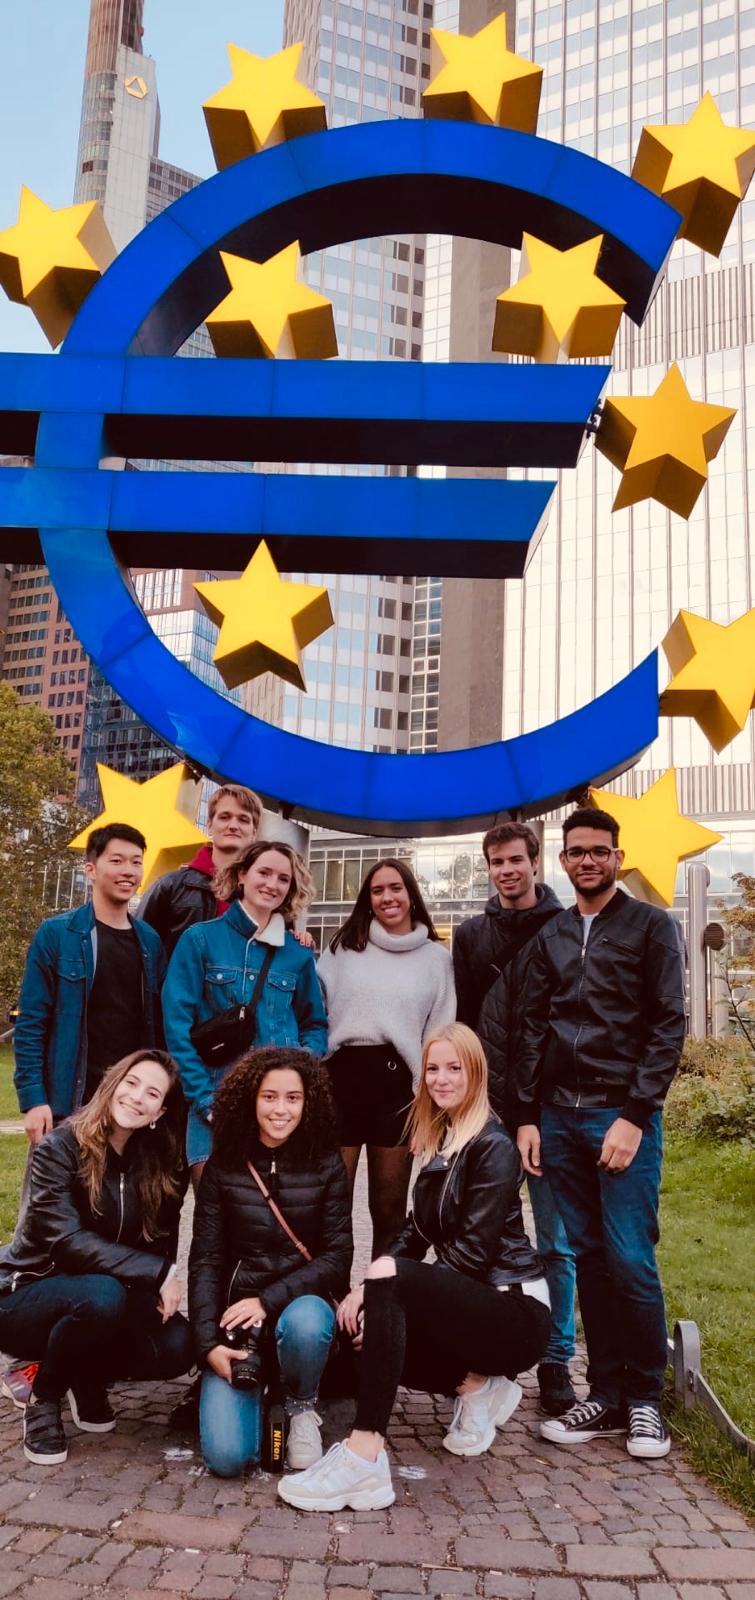 Group of students in front of a euro sign with yellow stars in brussels.